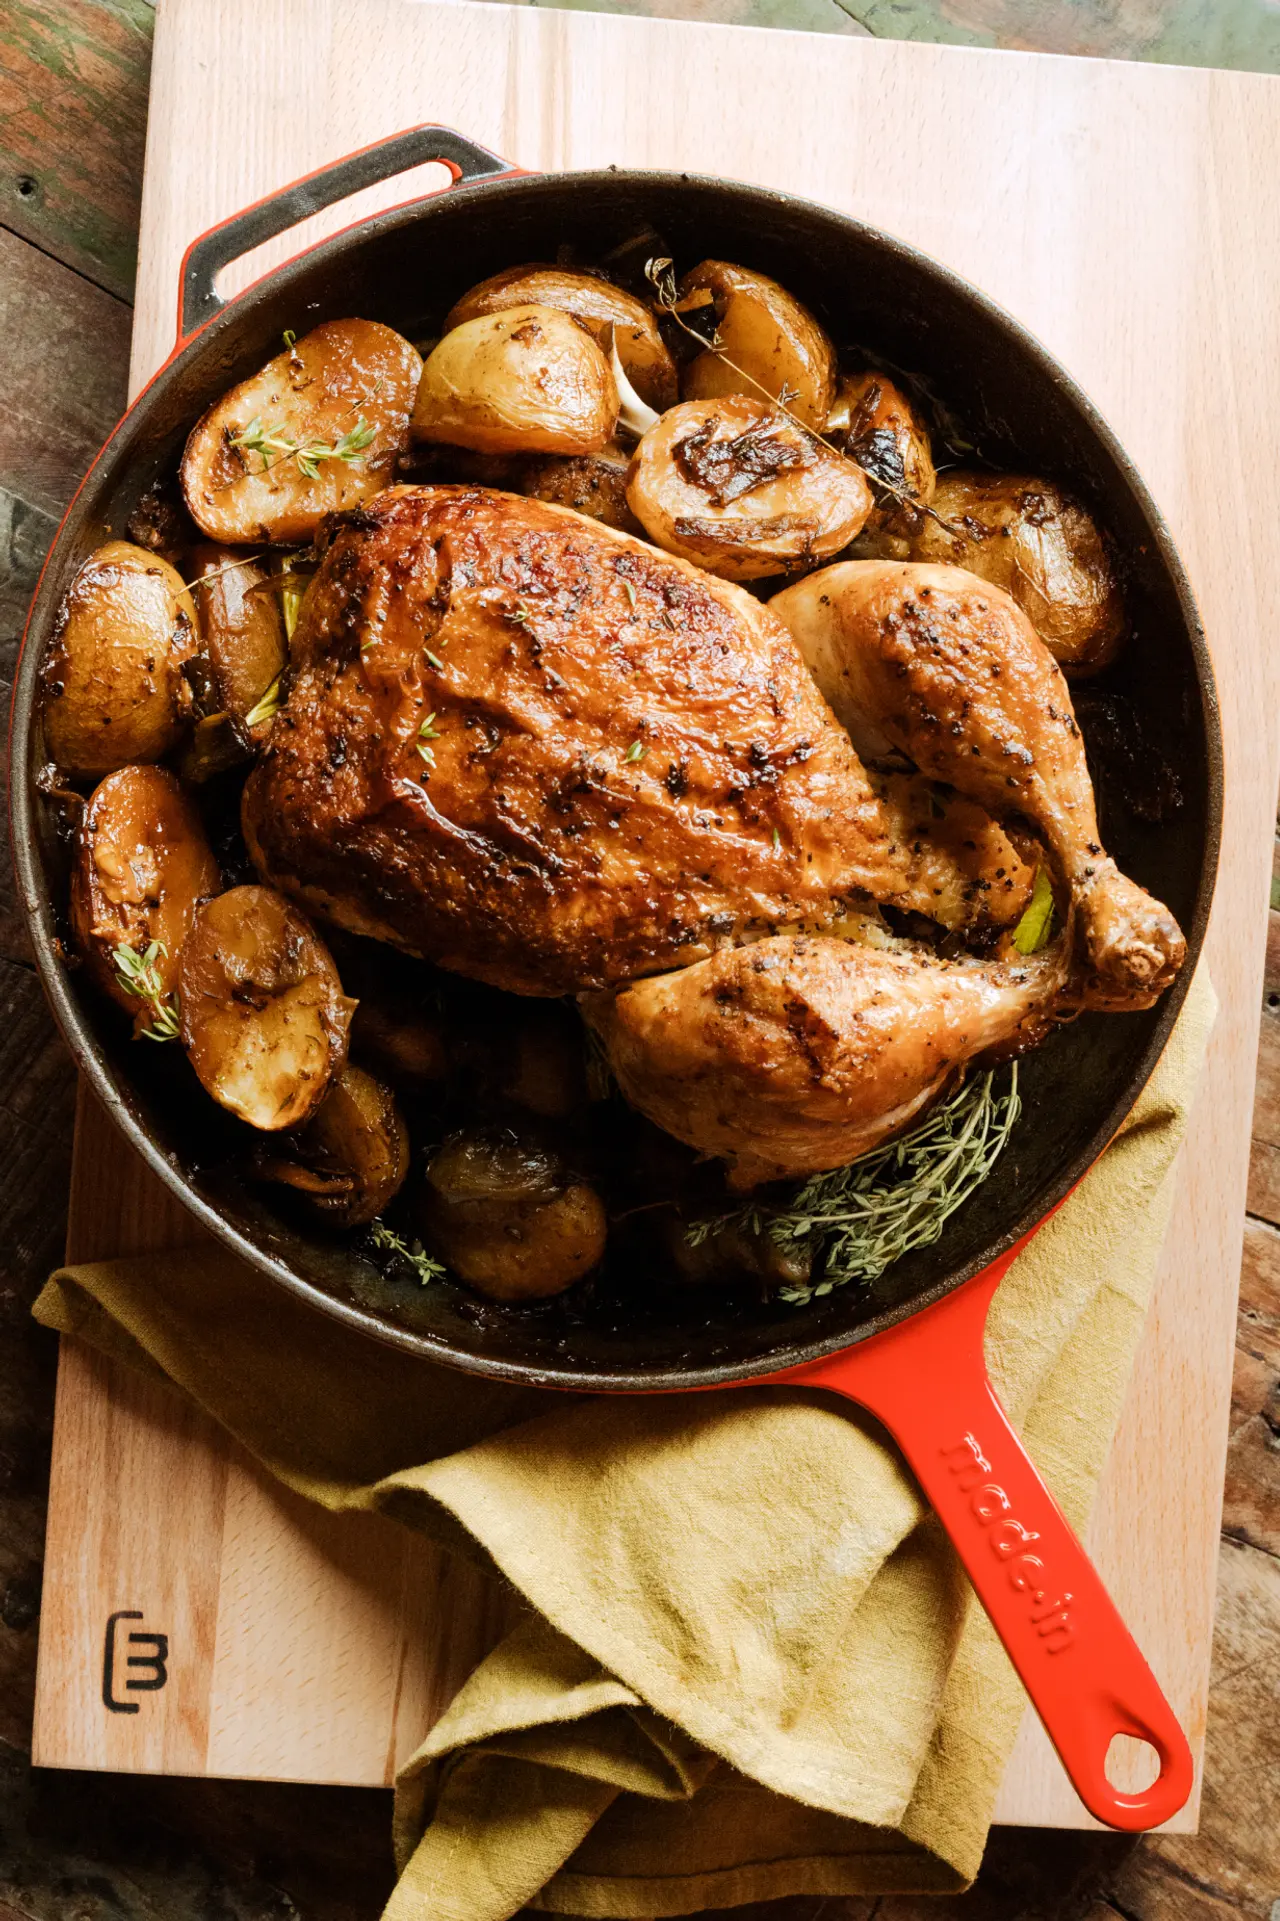 A roasted chicken with golden-brown skin is presented in a red-handled skillet surrounded by roasted potatoes and herbs.